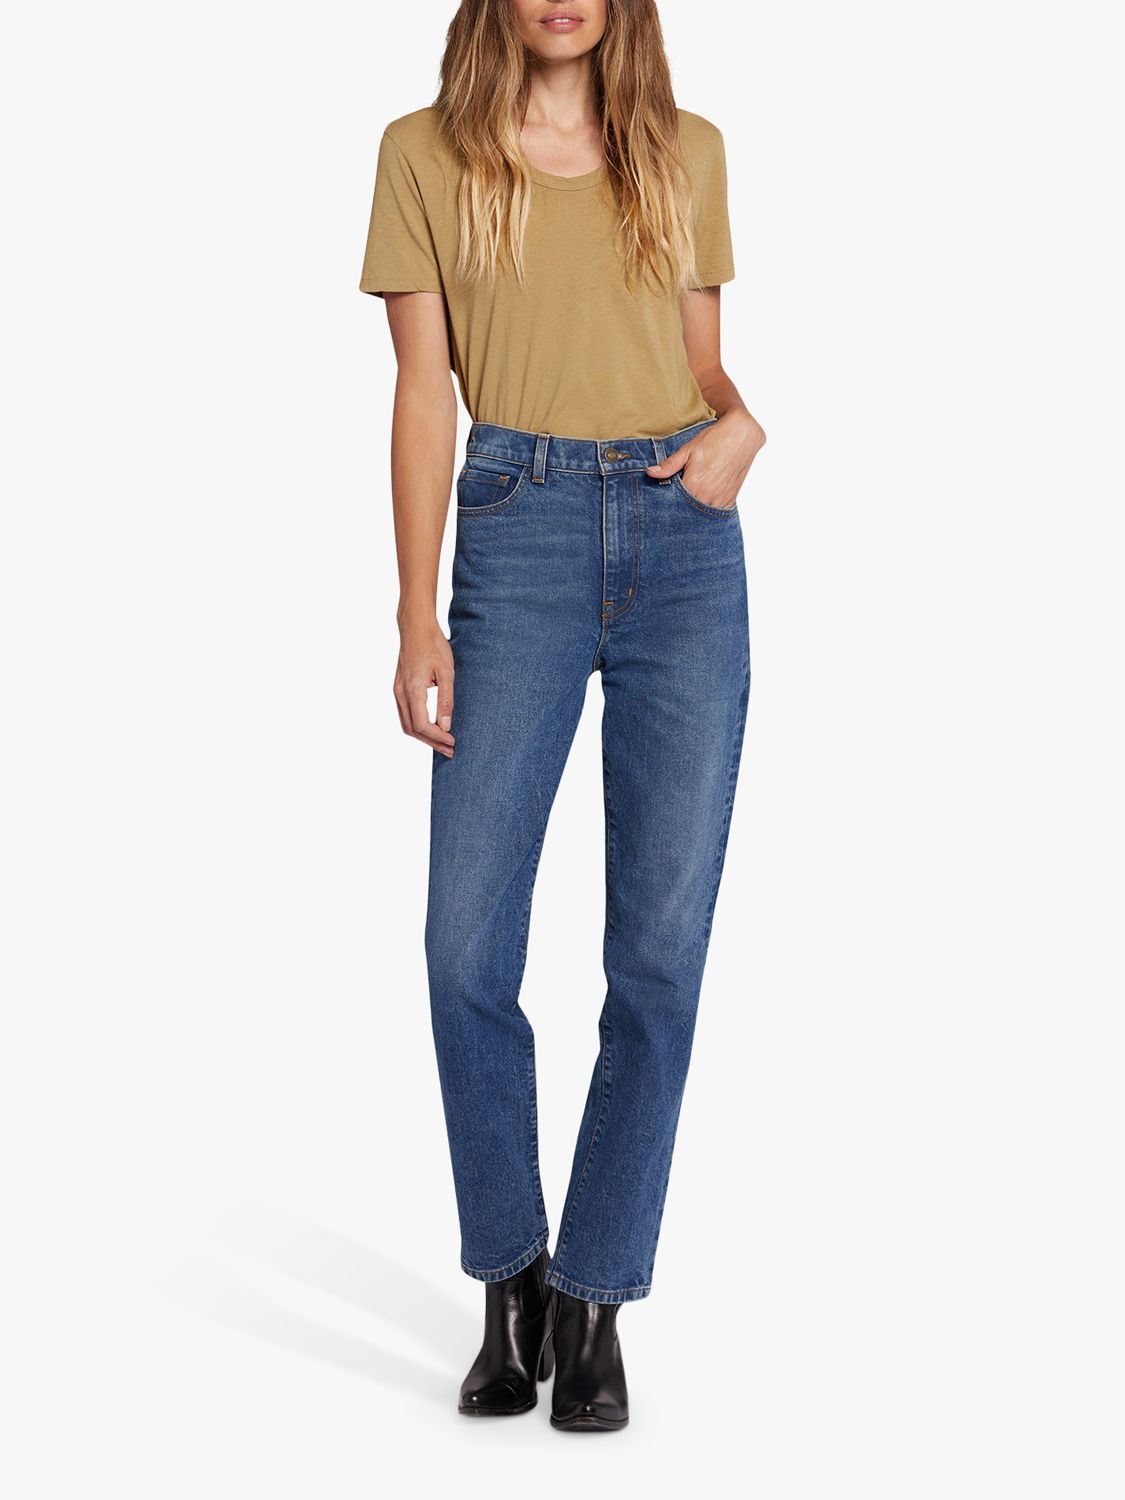 Buy Current/Elliott The Soulmate High Rise Slim Straight Jean, Lighthouse Mid Blue Online at johnlewis.com